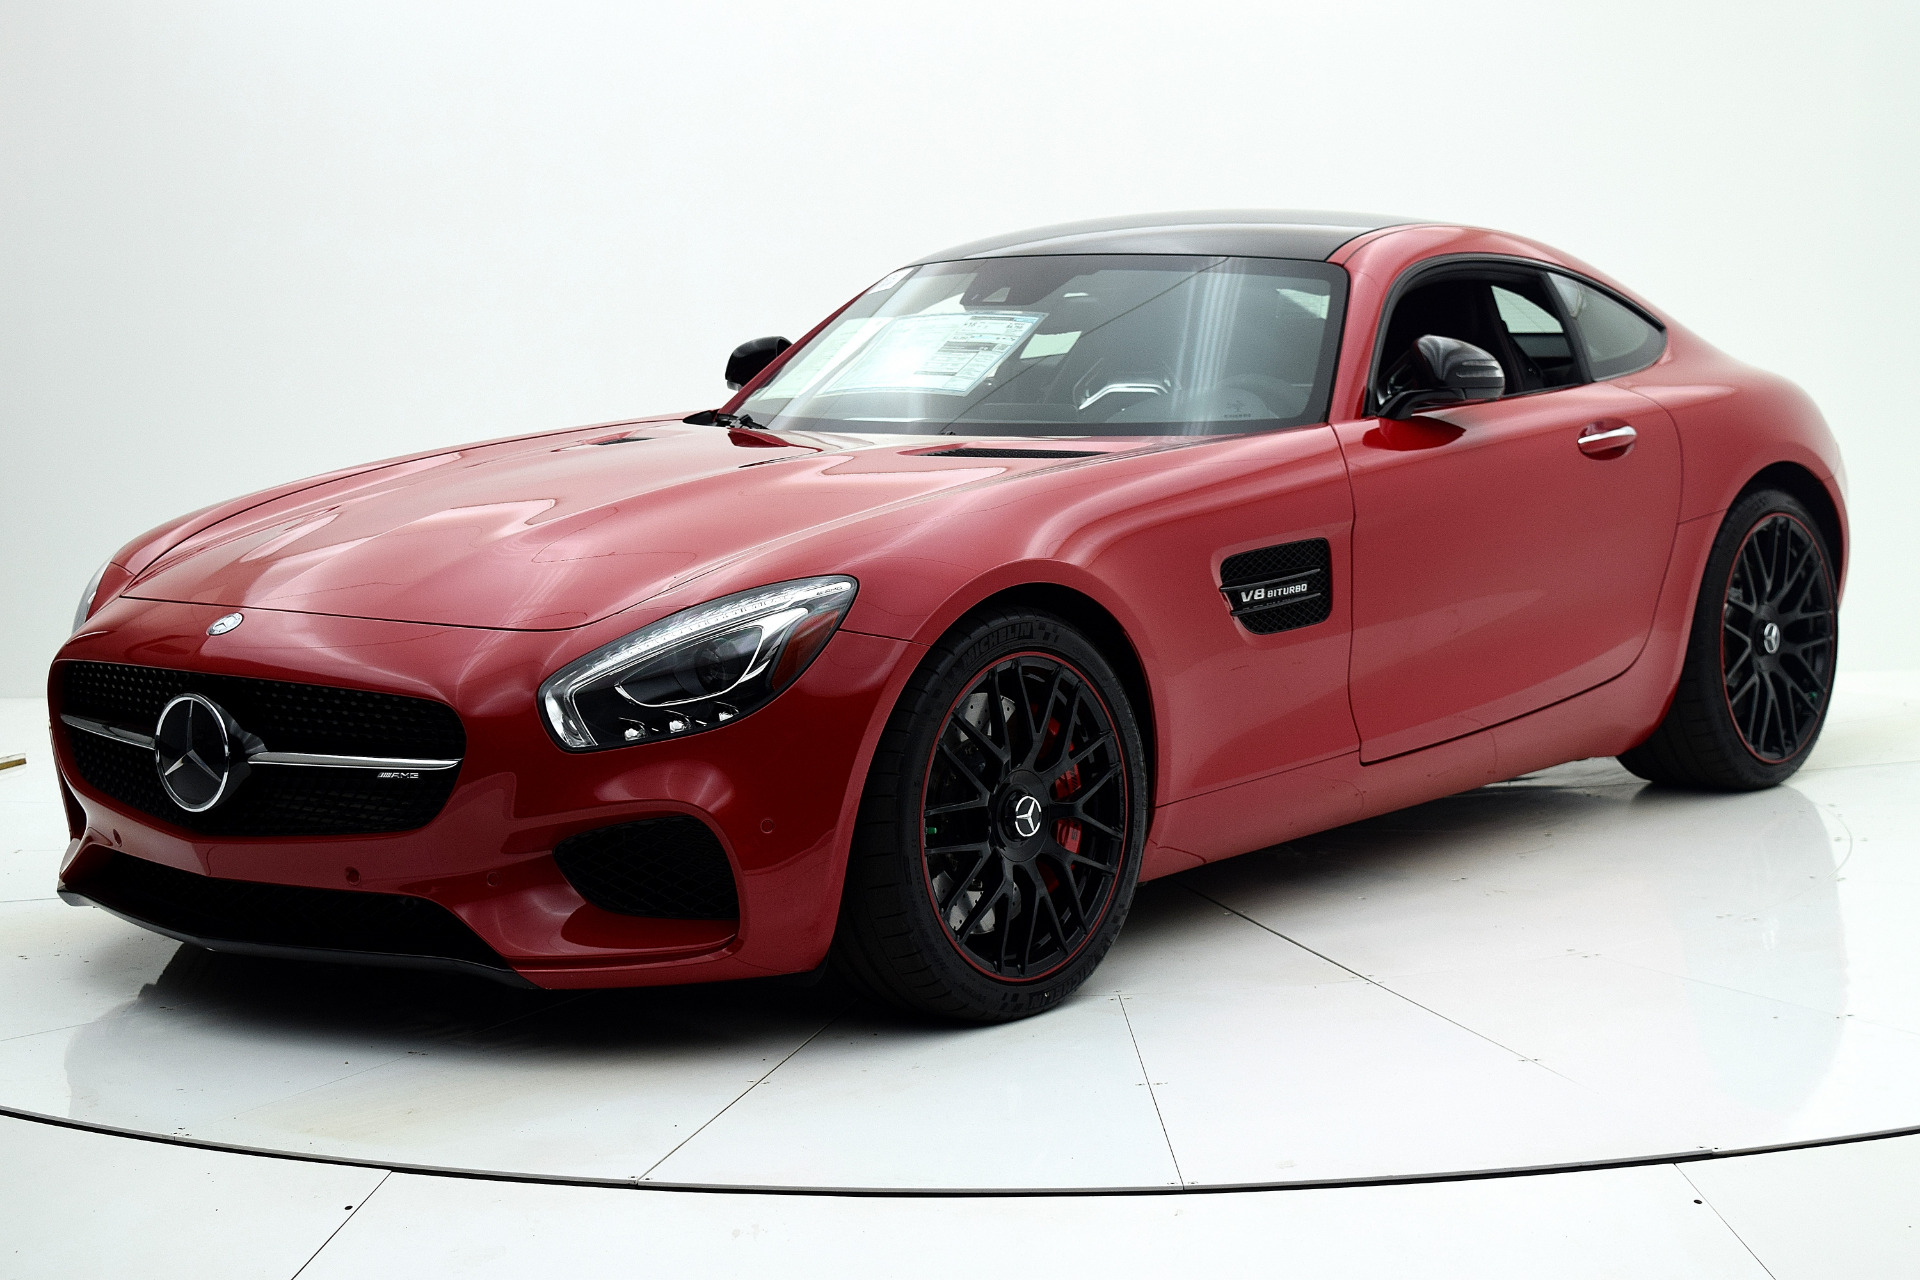 Used 2017 Mercedes Benz Amg Gt S For Sale 153 510 F C Kerbeck Rolls Royce Stock 260jiaji